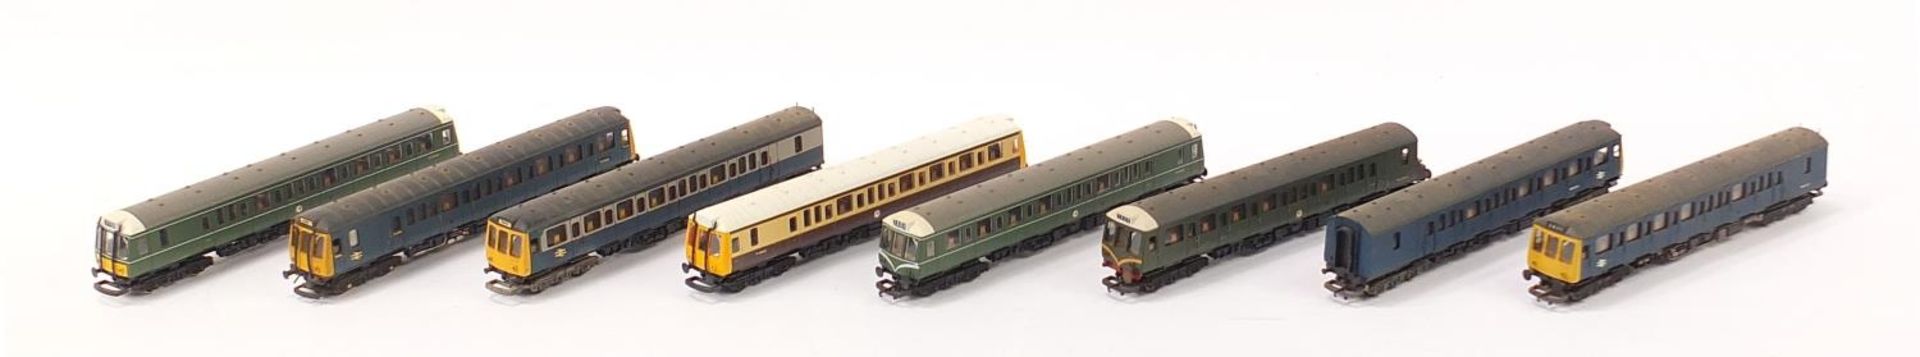 Eight Lima 00 gauge DMU locomotives : For Further Condition Reports Please Visit Our Website -